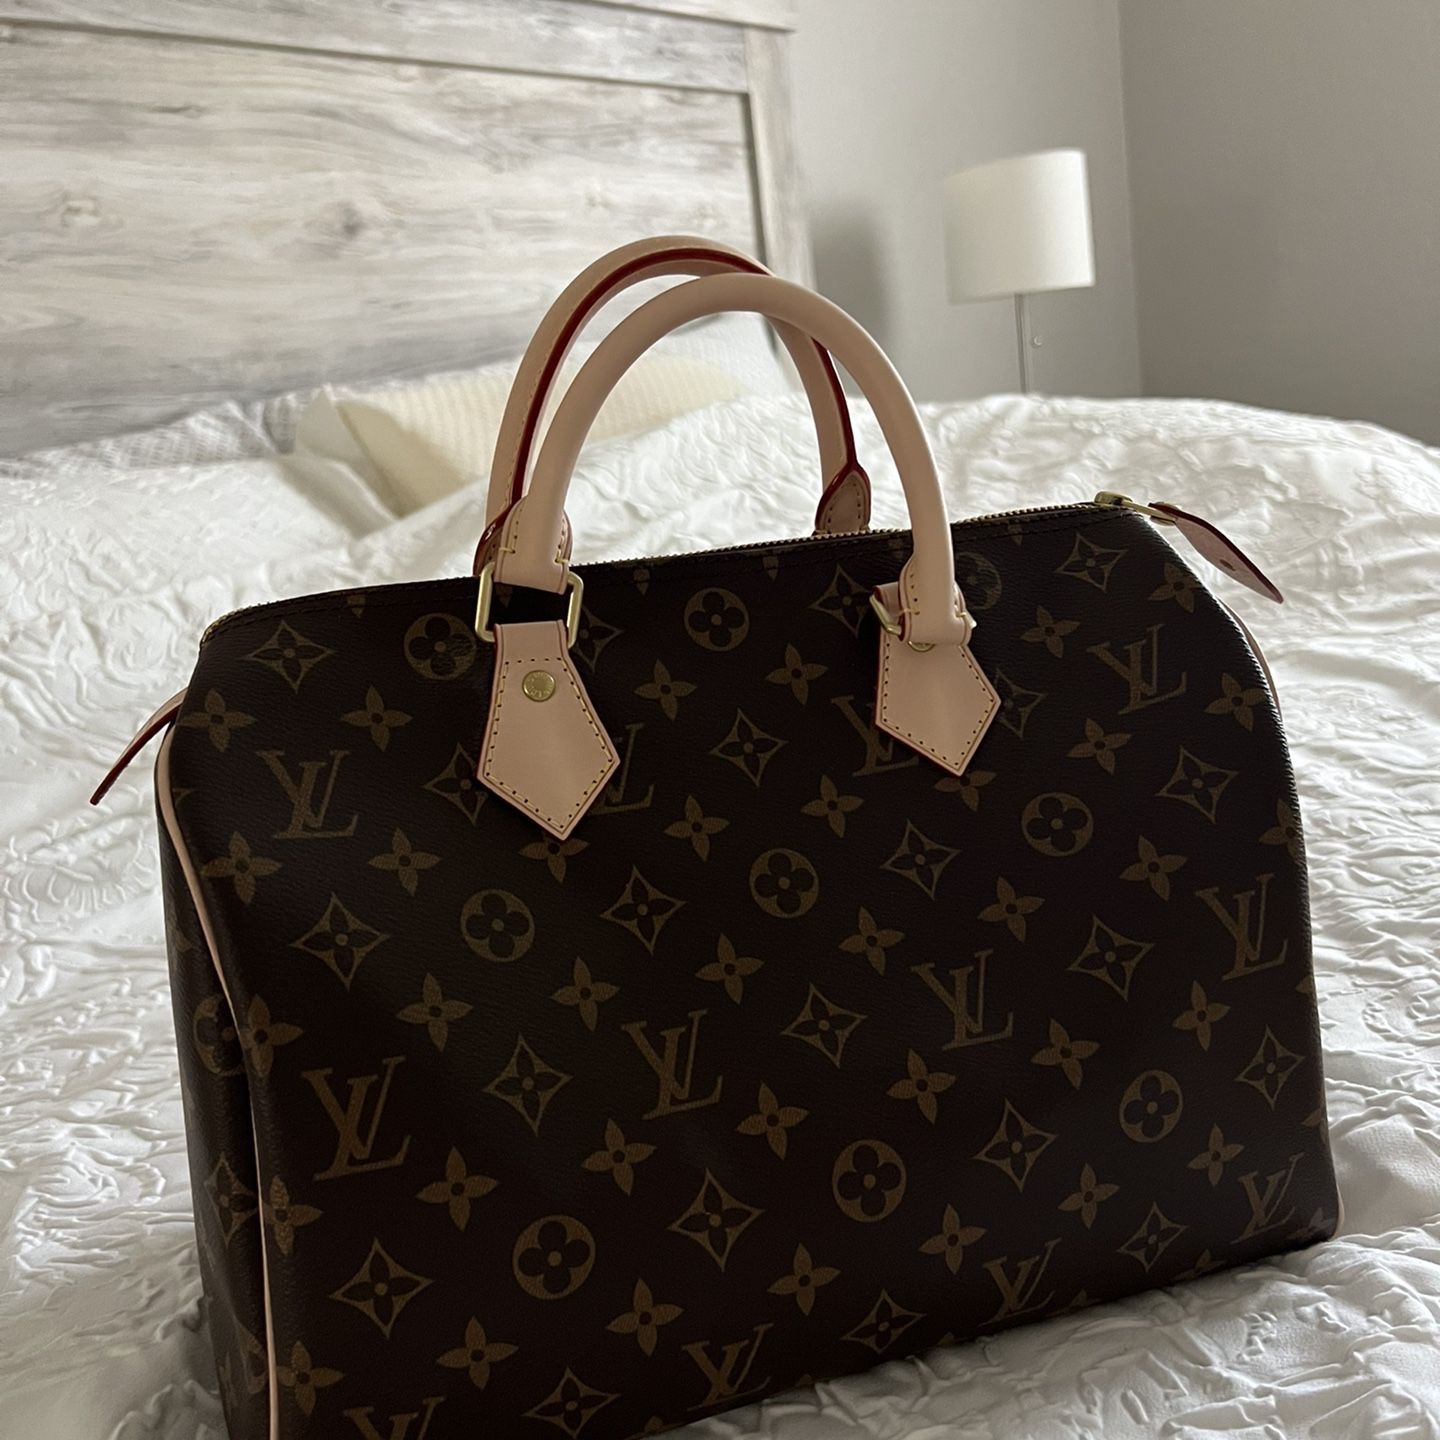 Louis Vuitton Vintage Cosmetic Trunk for Sale in Las Vegas, NV - OfferUp